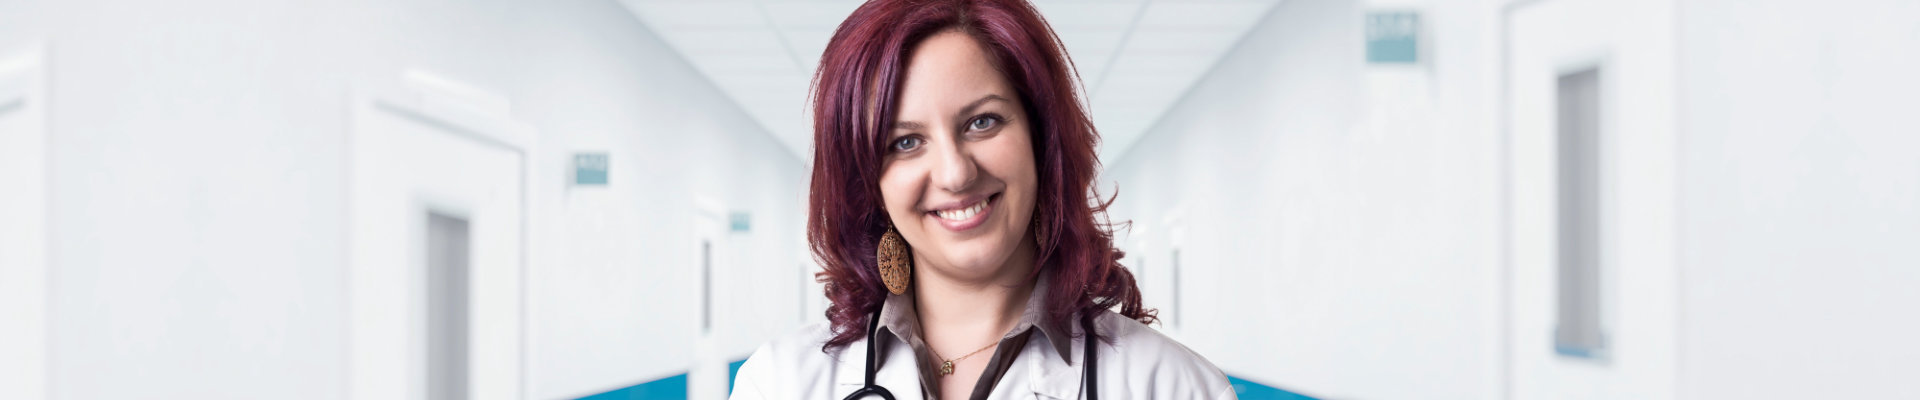 nurse with red hair smiling for the camera